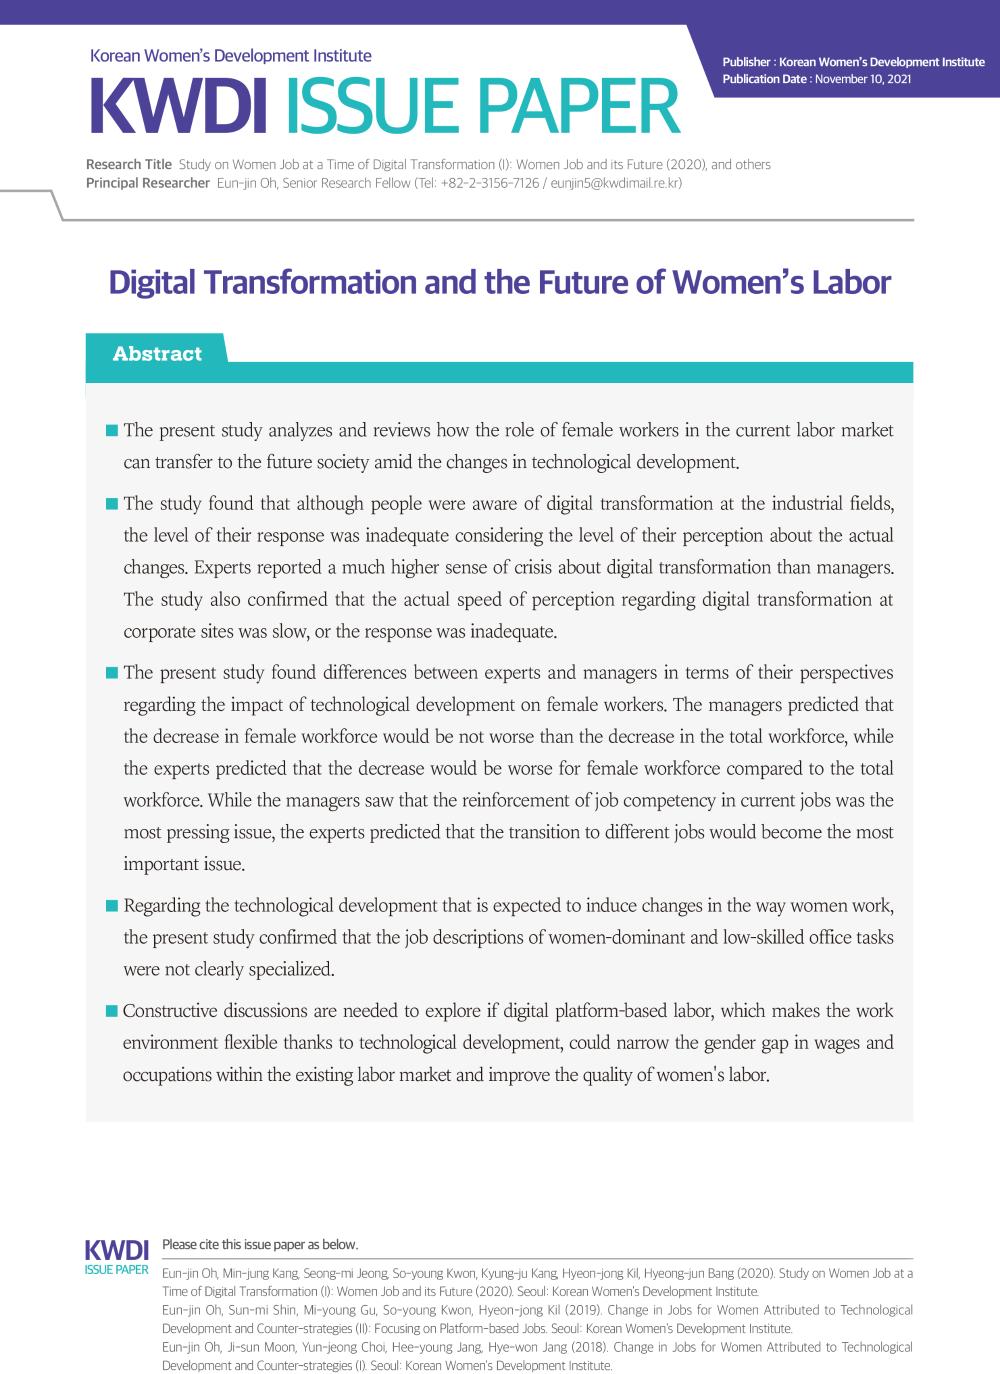 [Issue Paper] Digital Transformation and the Future of Women’s Labor